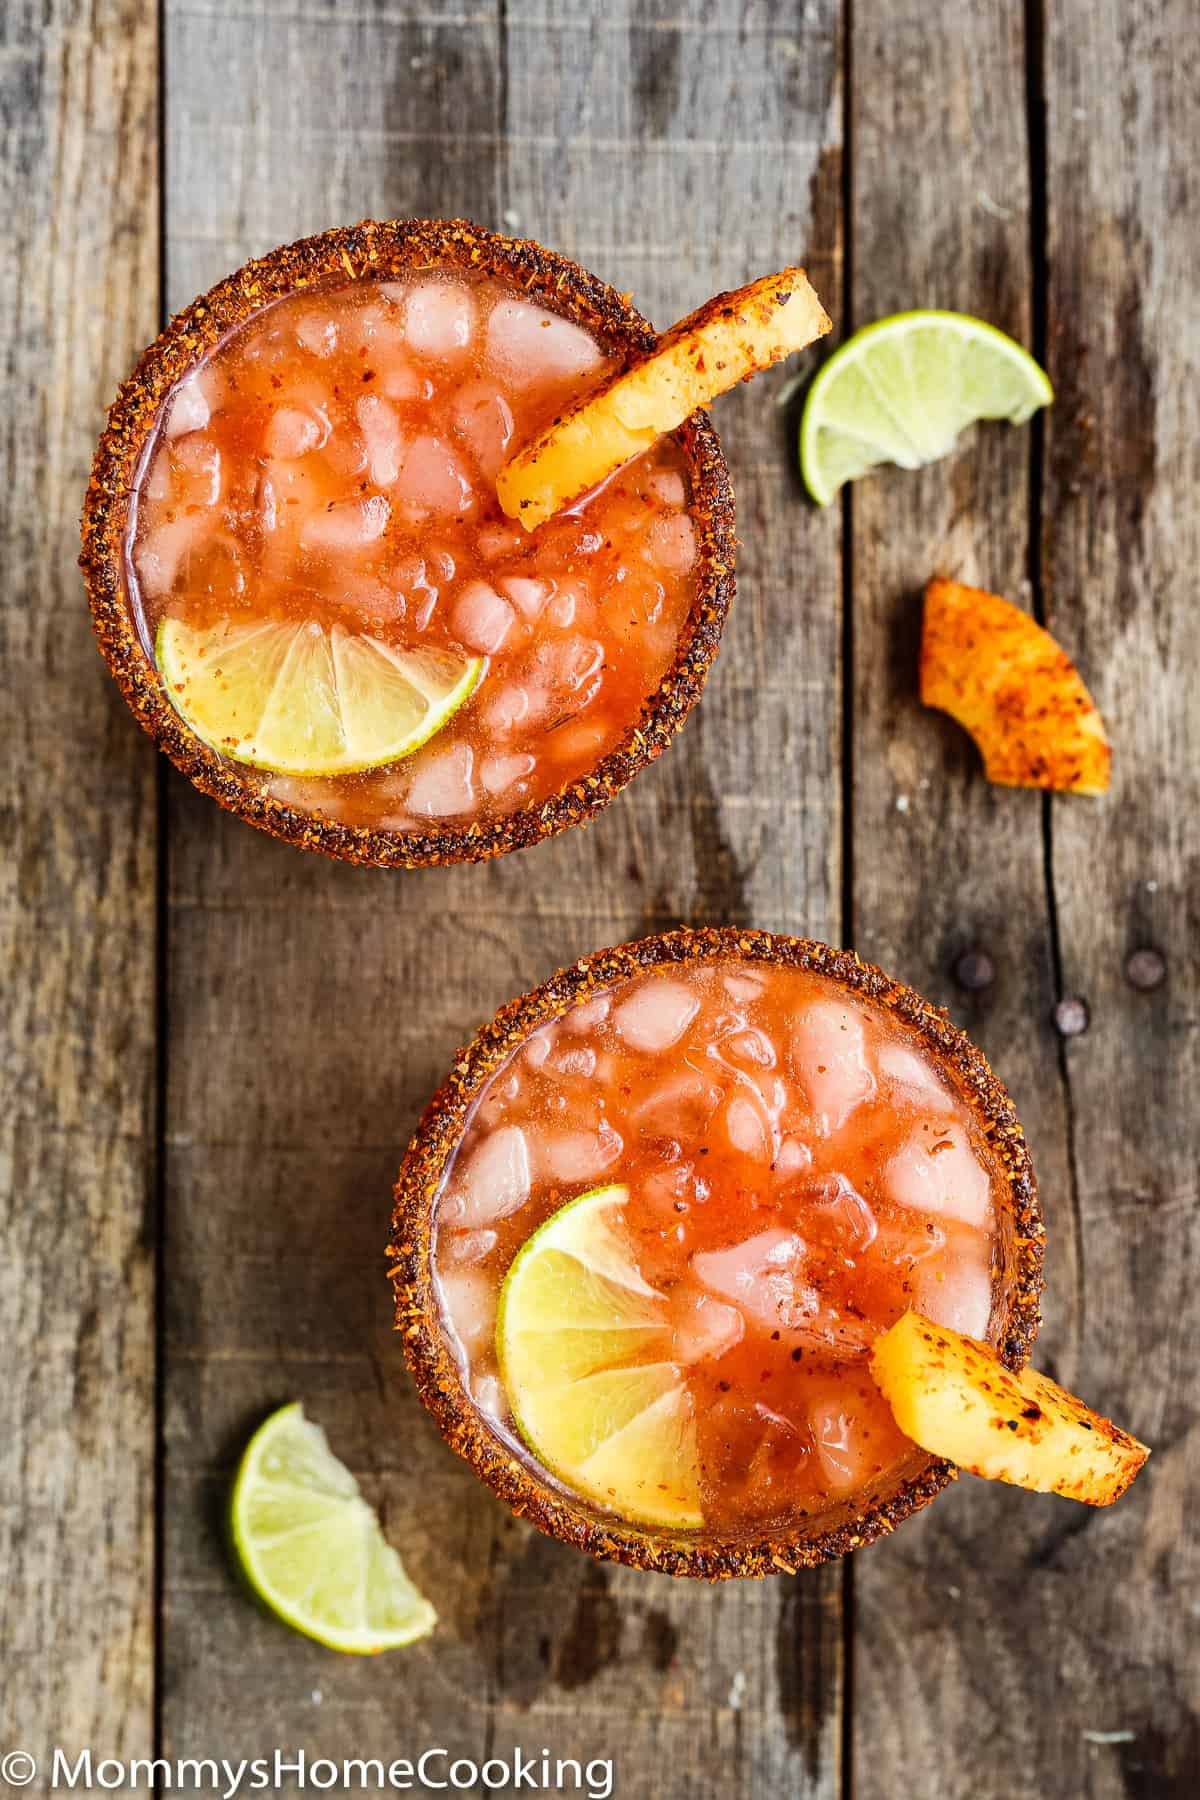 Overhead view of two Pineapple Michelada.